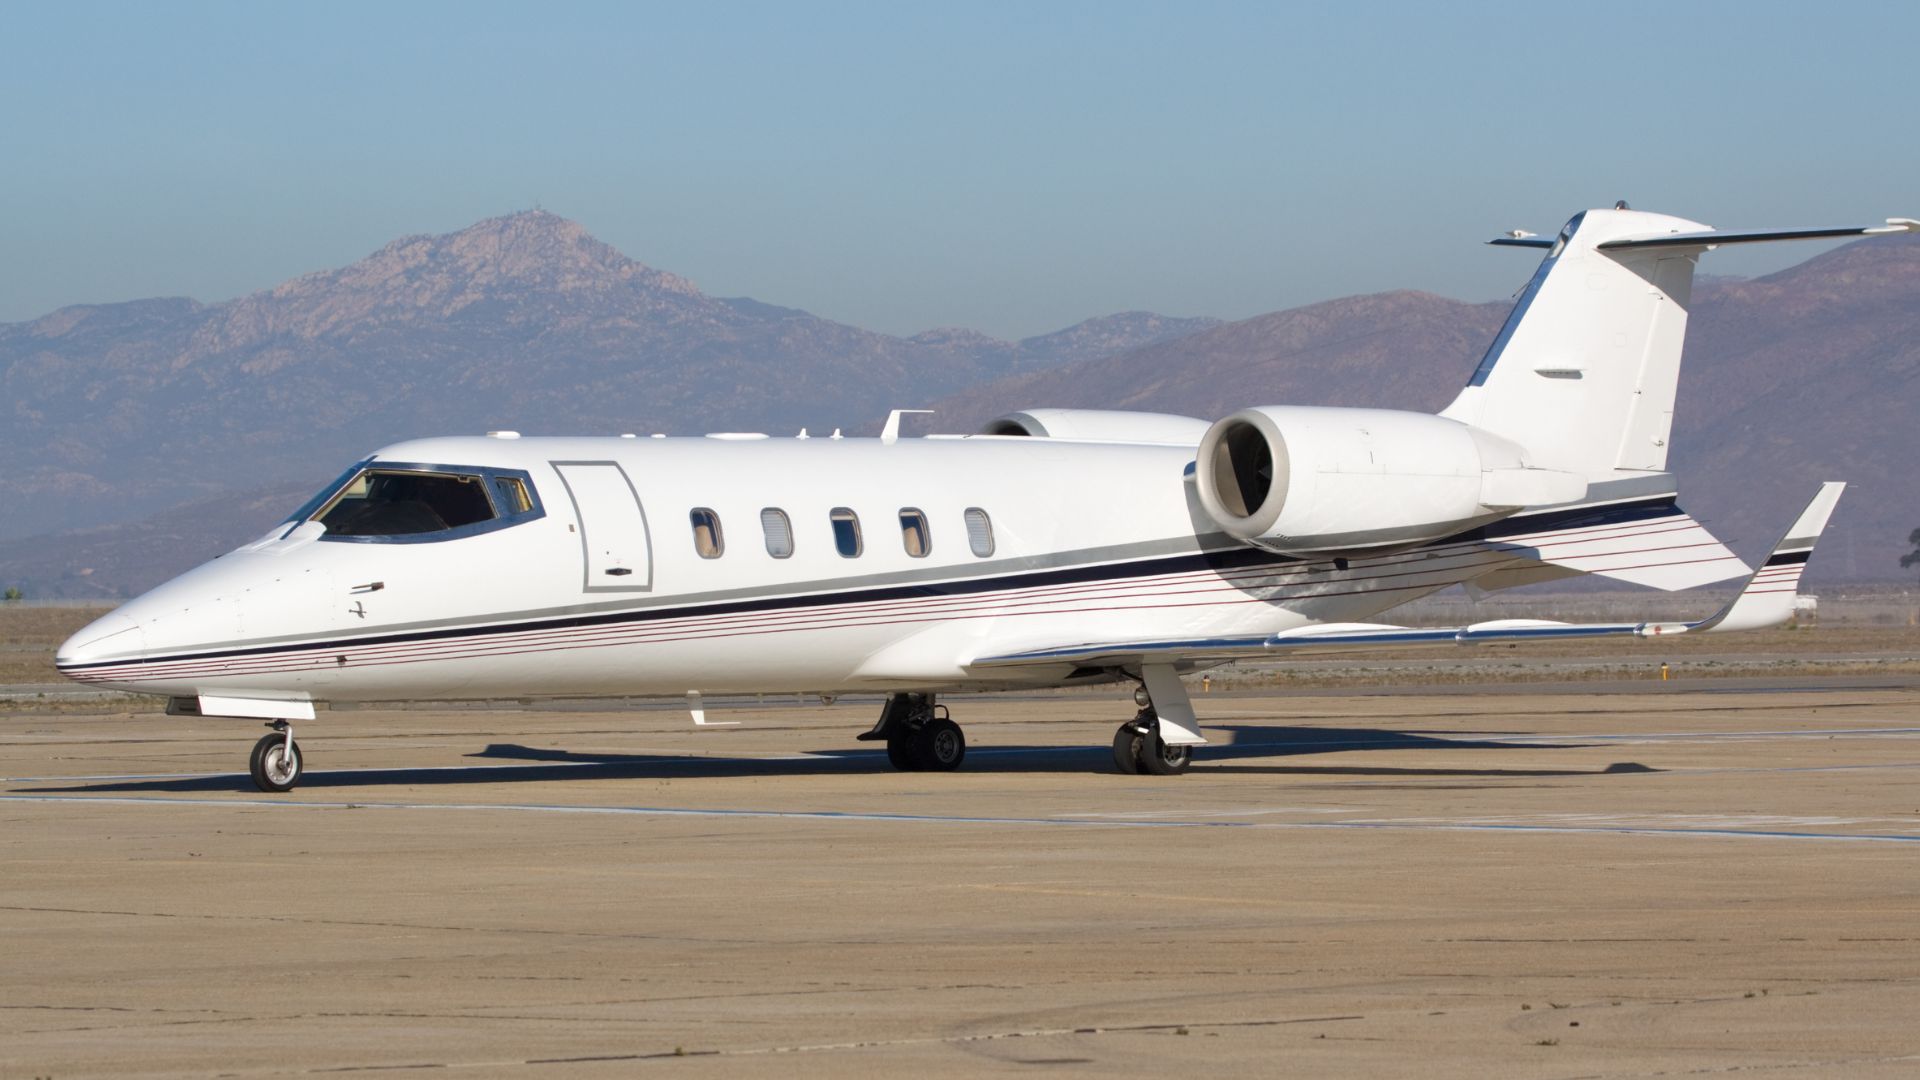 International Private Jet Charter: Costs and Aircraft for Hire